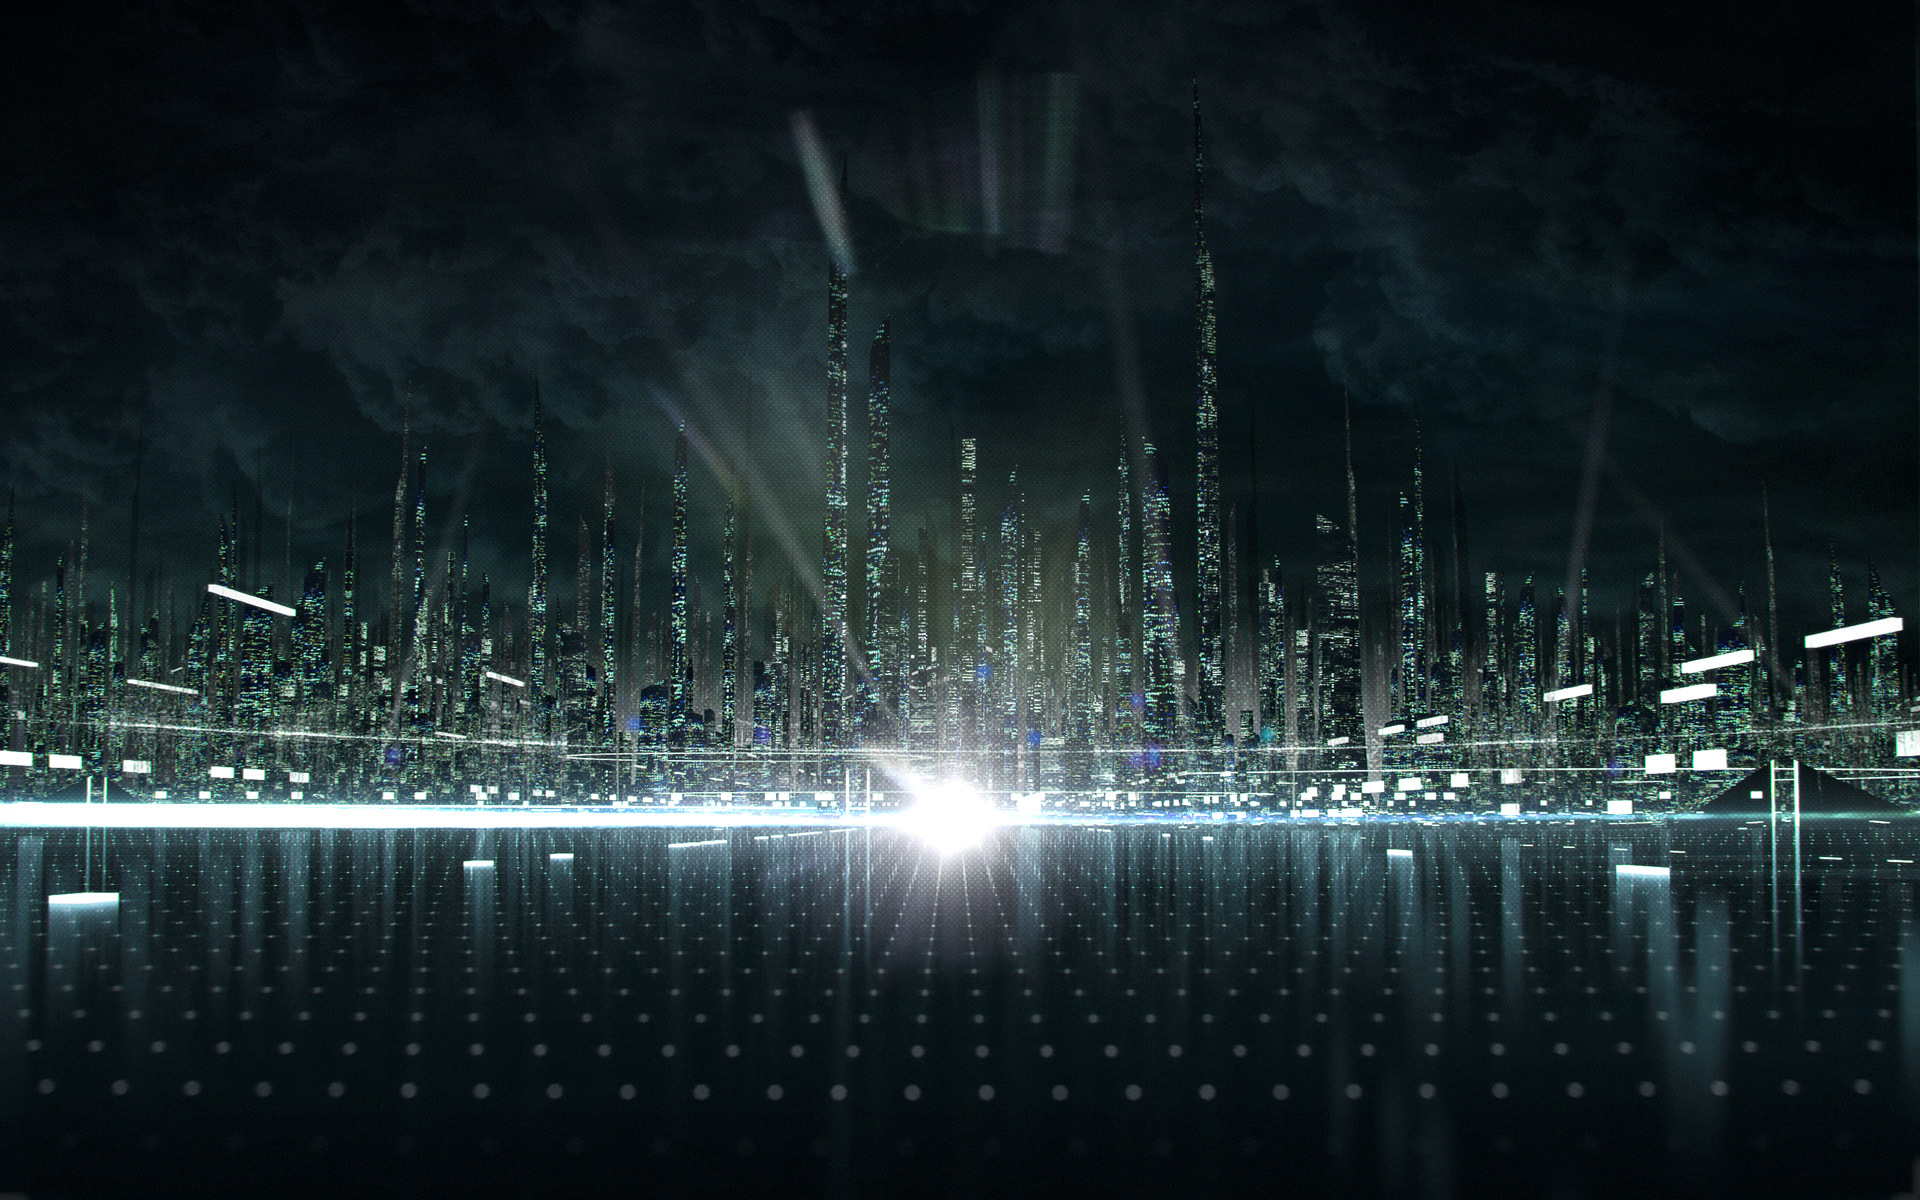 Tron_Legacy__City_concept__by_Shelest.jpg